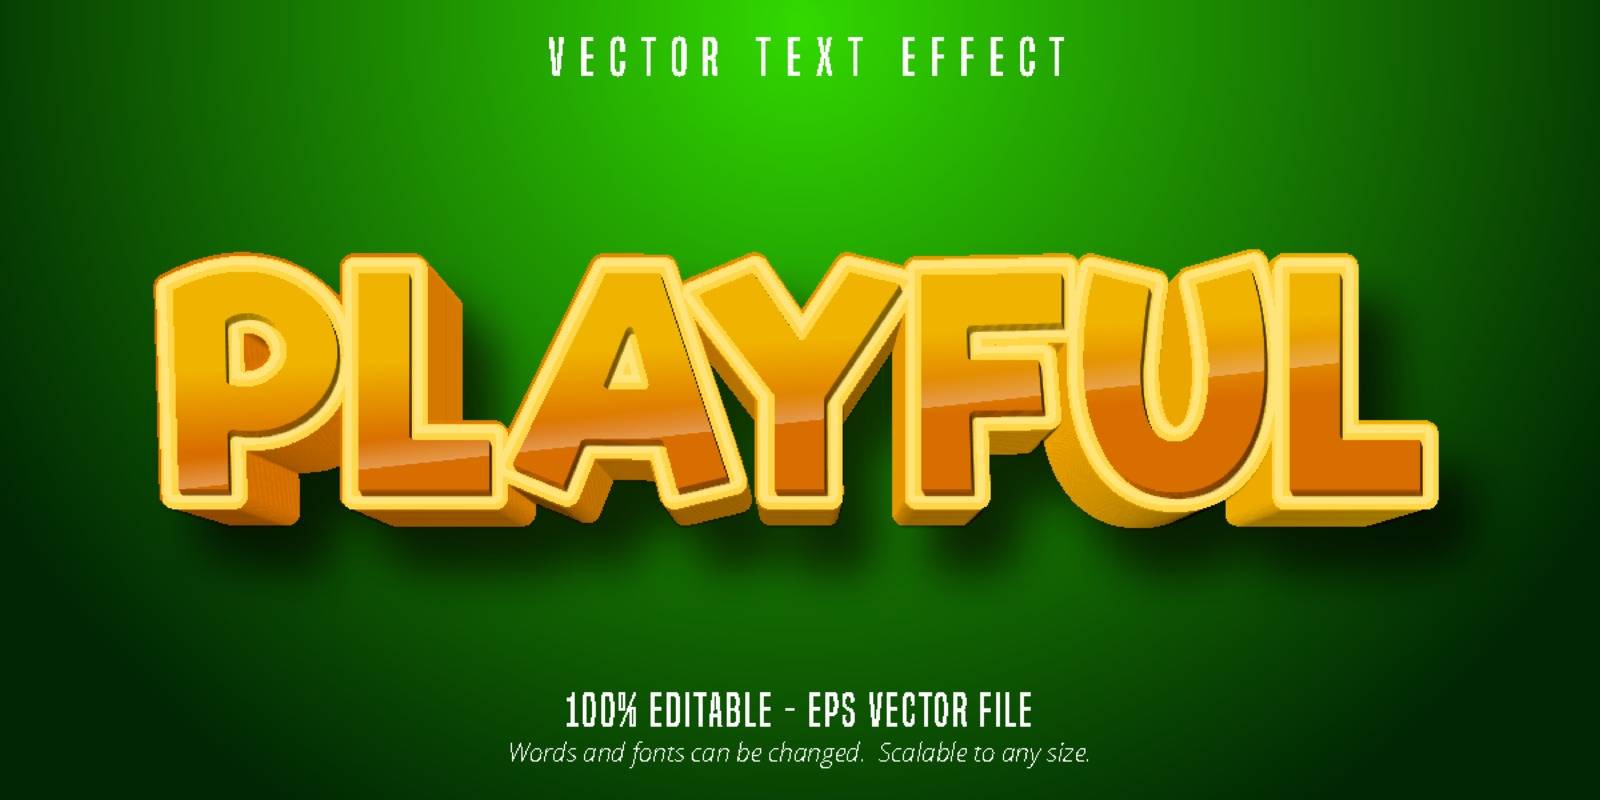 Playful text, comic style editable text effect